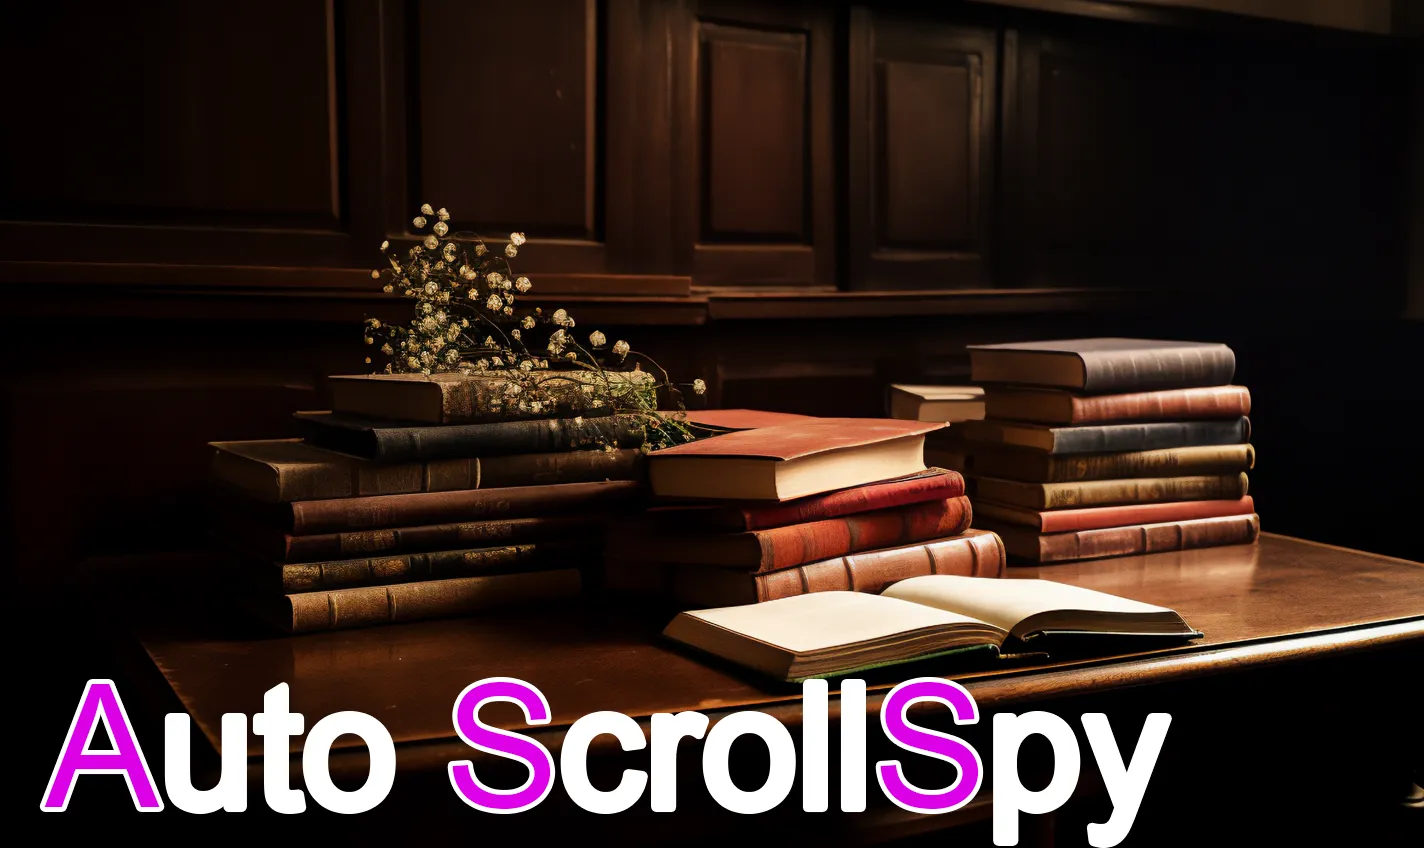 Introductory image for this article titled Auto Scroll Spy (Joomla Extension)